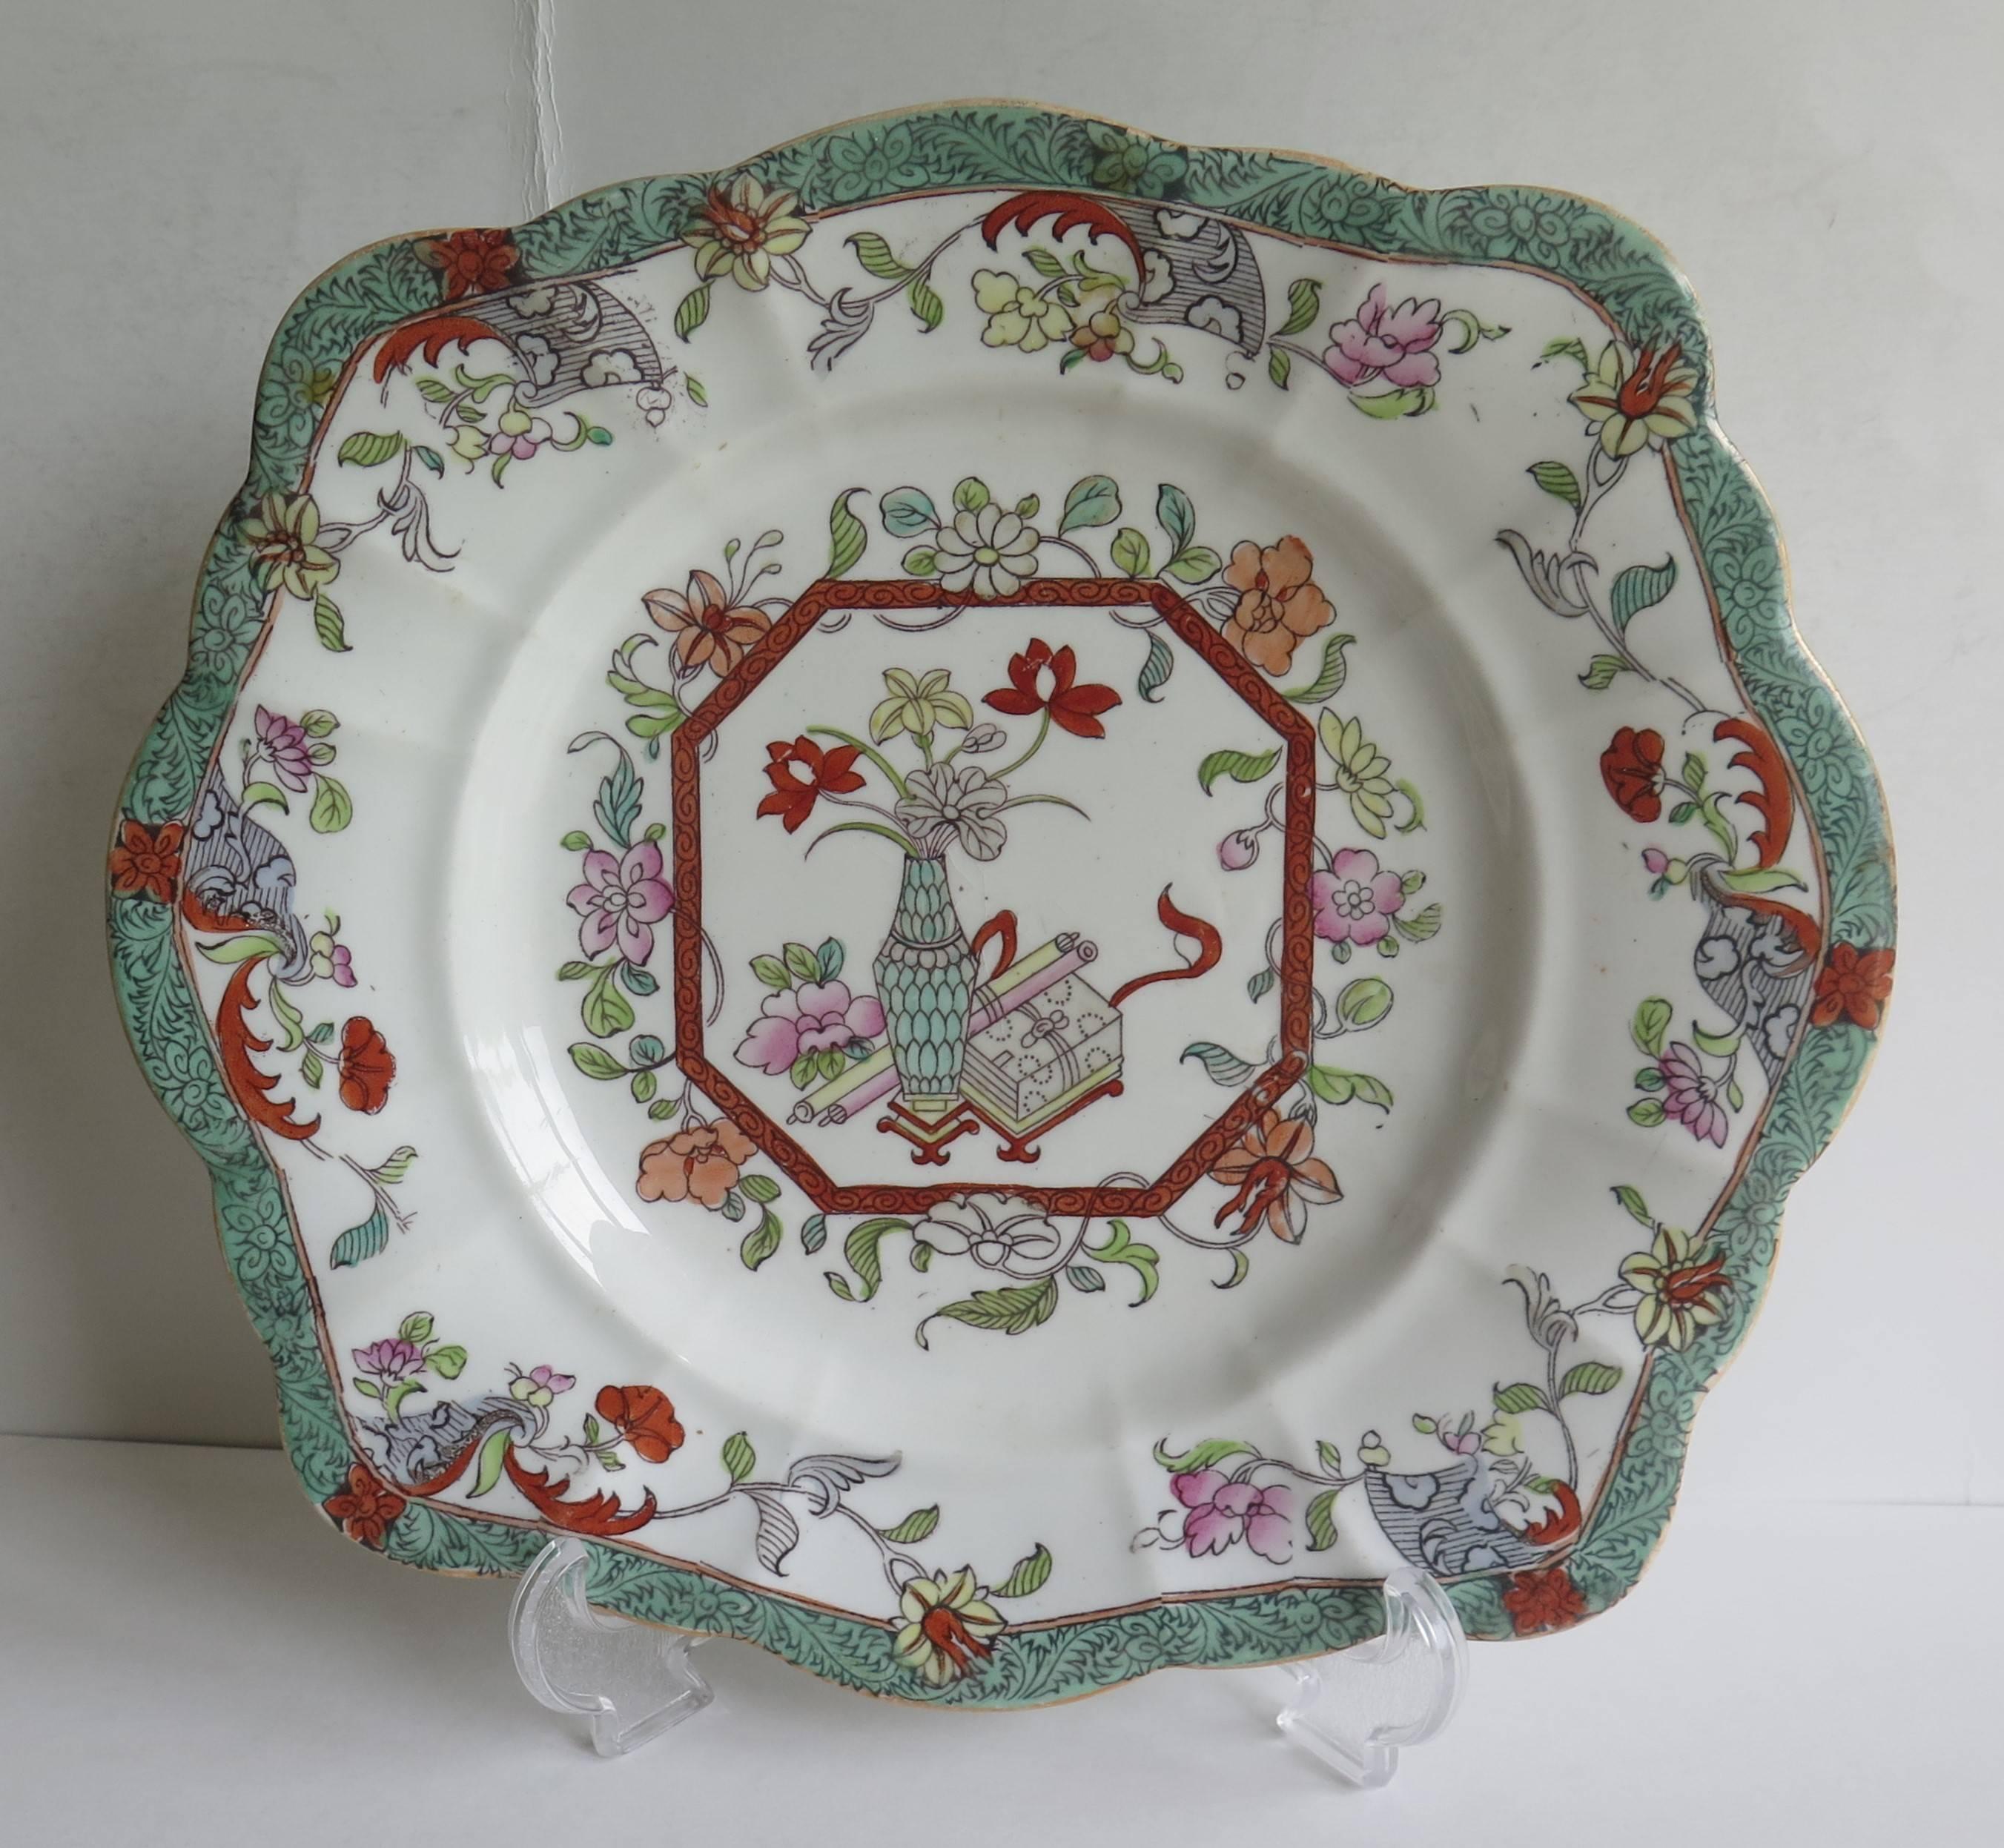 This is a sandwich dish or plate by Mason's Ironstone, England, dating to the first half of the 19th Century, Circa 1940.

These dishes are fairly rare, having a moulded and slightly fluted square shape.

This dish is decorated in the Vase and Box